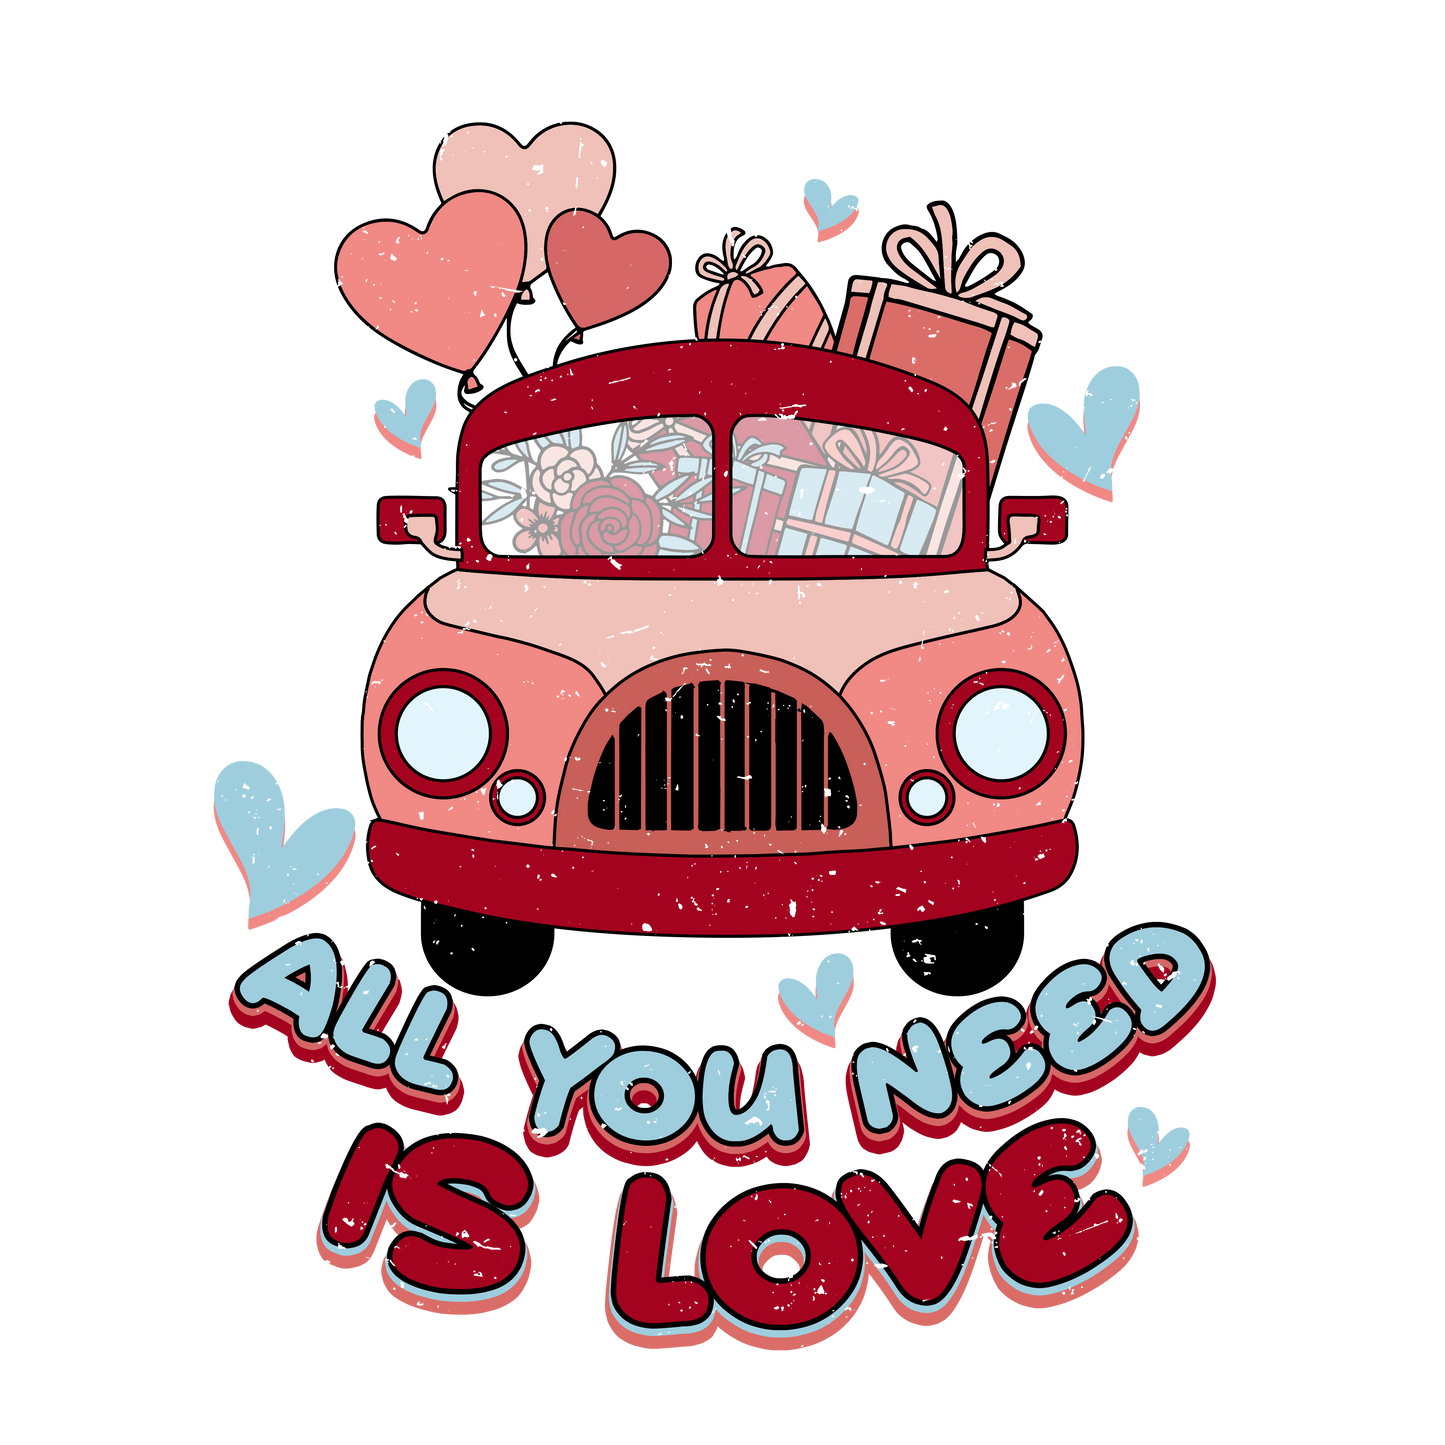 All You Need is Love Valentine Design Transfer